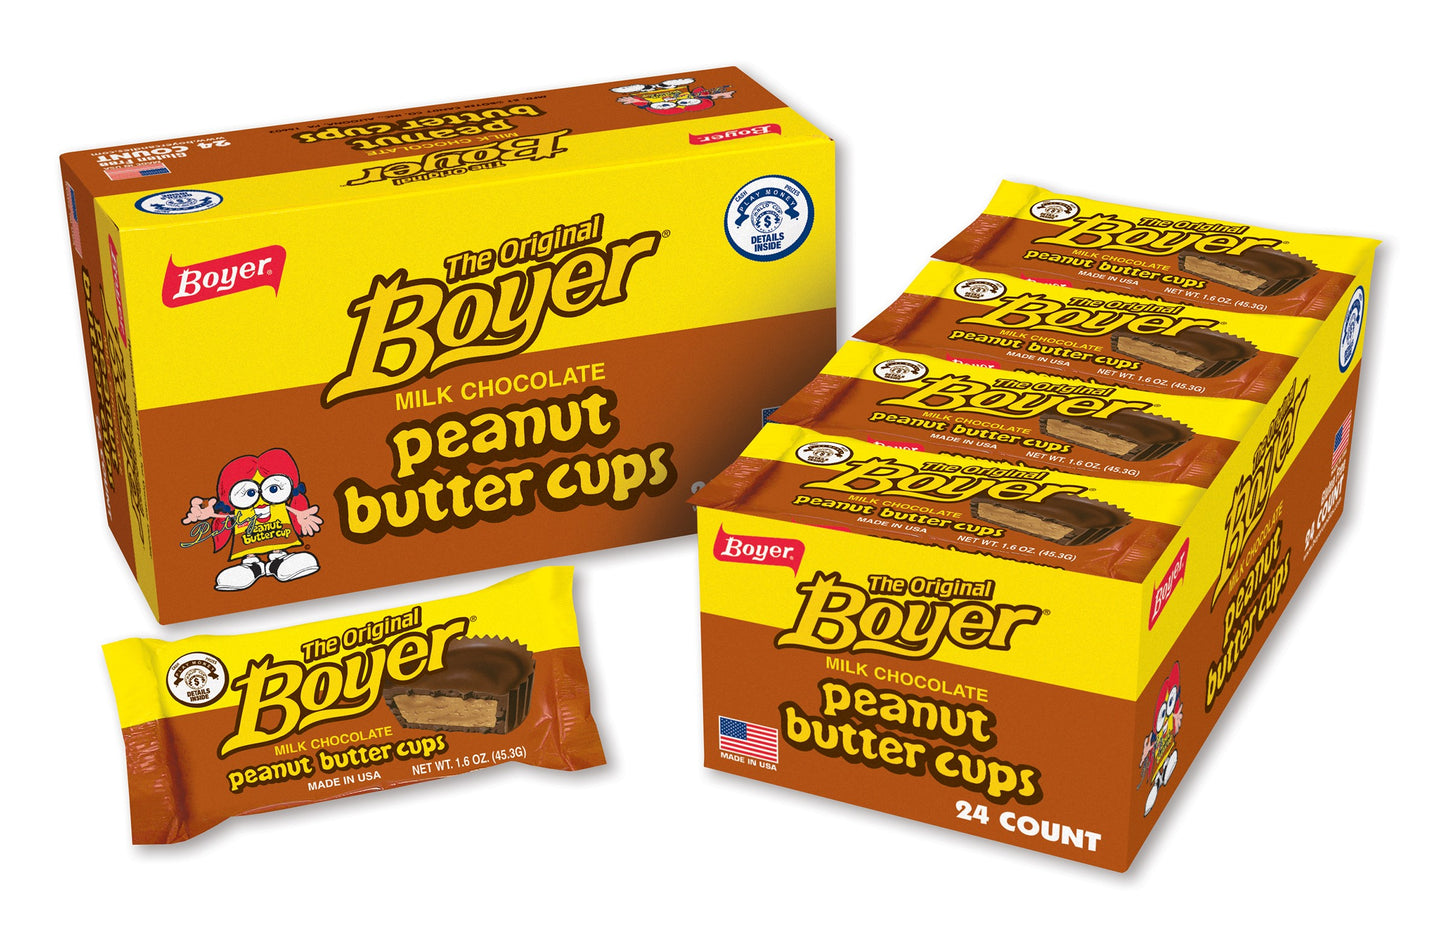 Peanut Butter Cup 2 pack - 24 count box